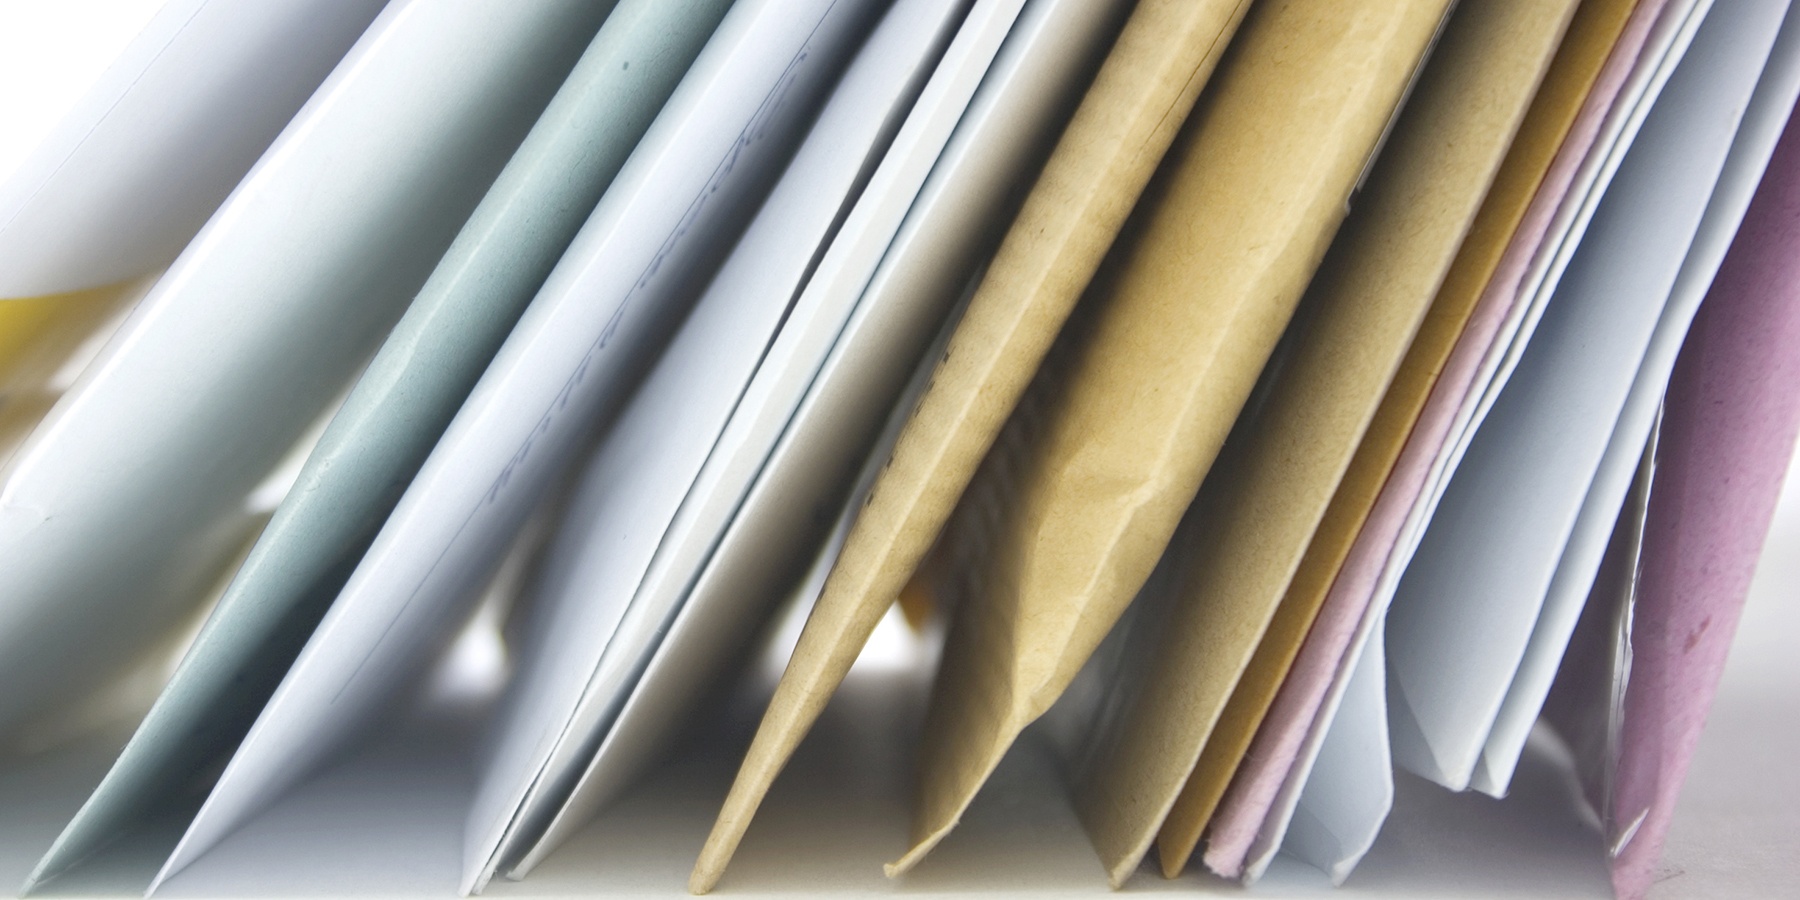 5 Tips To Complete Print Campaigns Amid COVID-Induced Paper Shortages